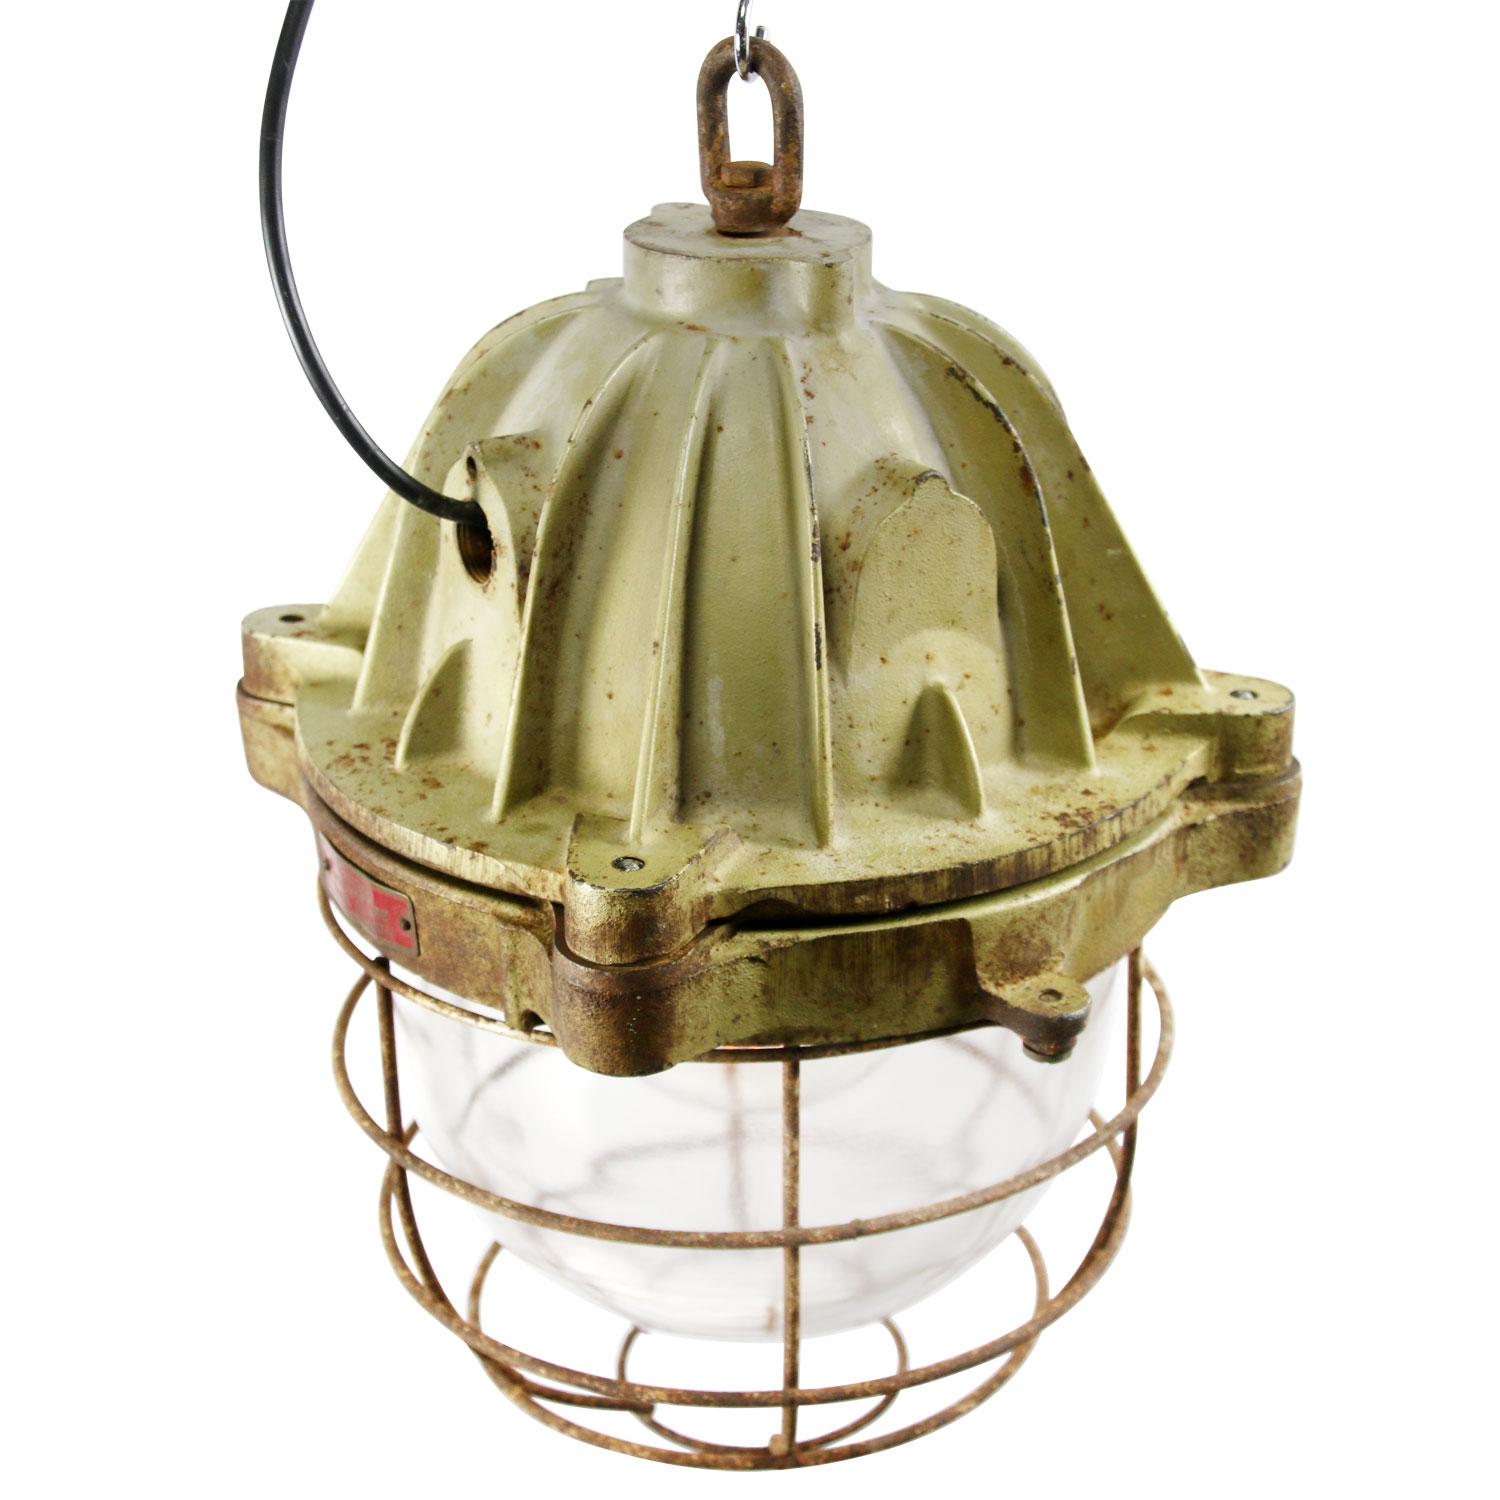 Vintage industrial hanging lamp
Brown painted cast iron
clear glass

Weight: 20.00 kg / 44.1 lb

Priced per individual item. All lamps have been made suitable by international standards for incandescent light bulbs, energy-efficient and LED